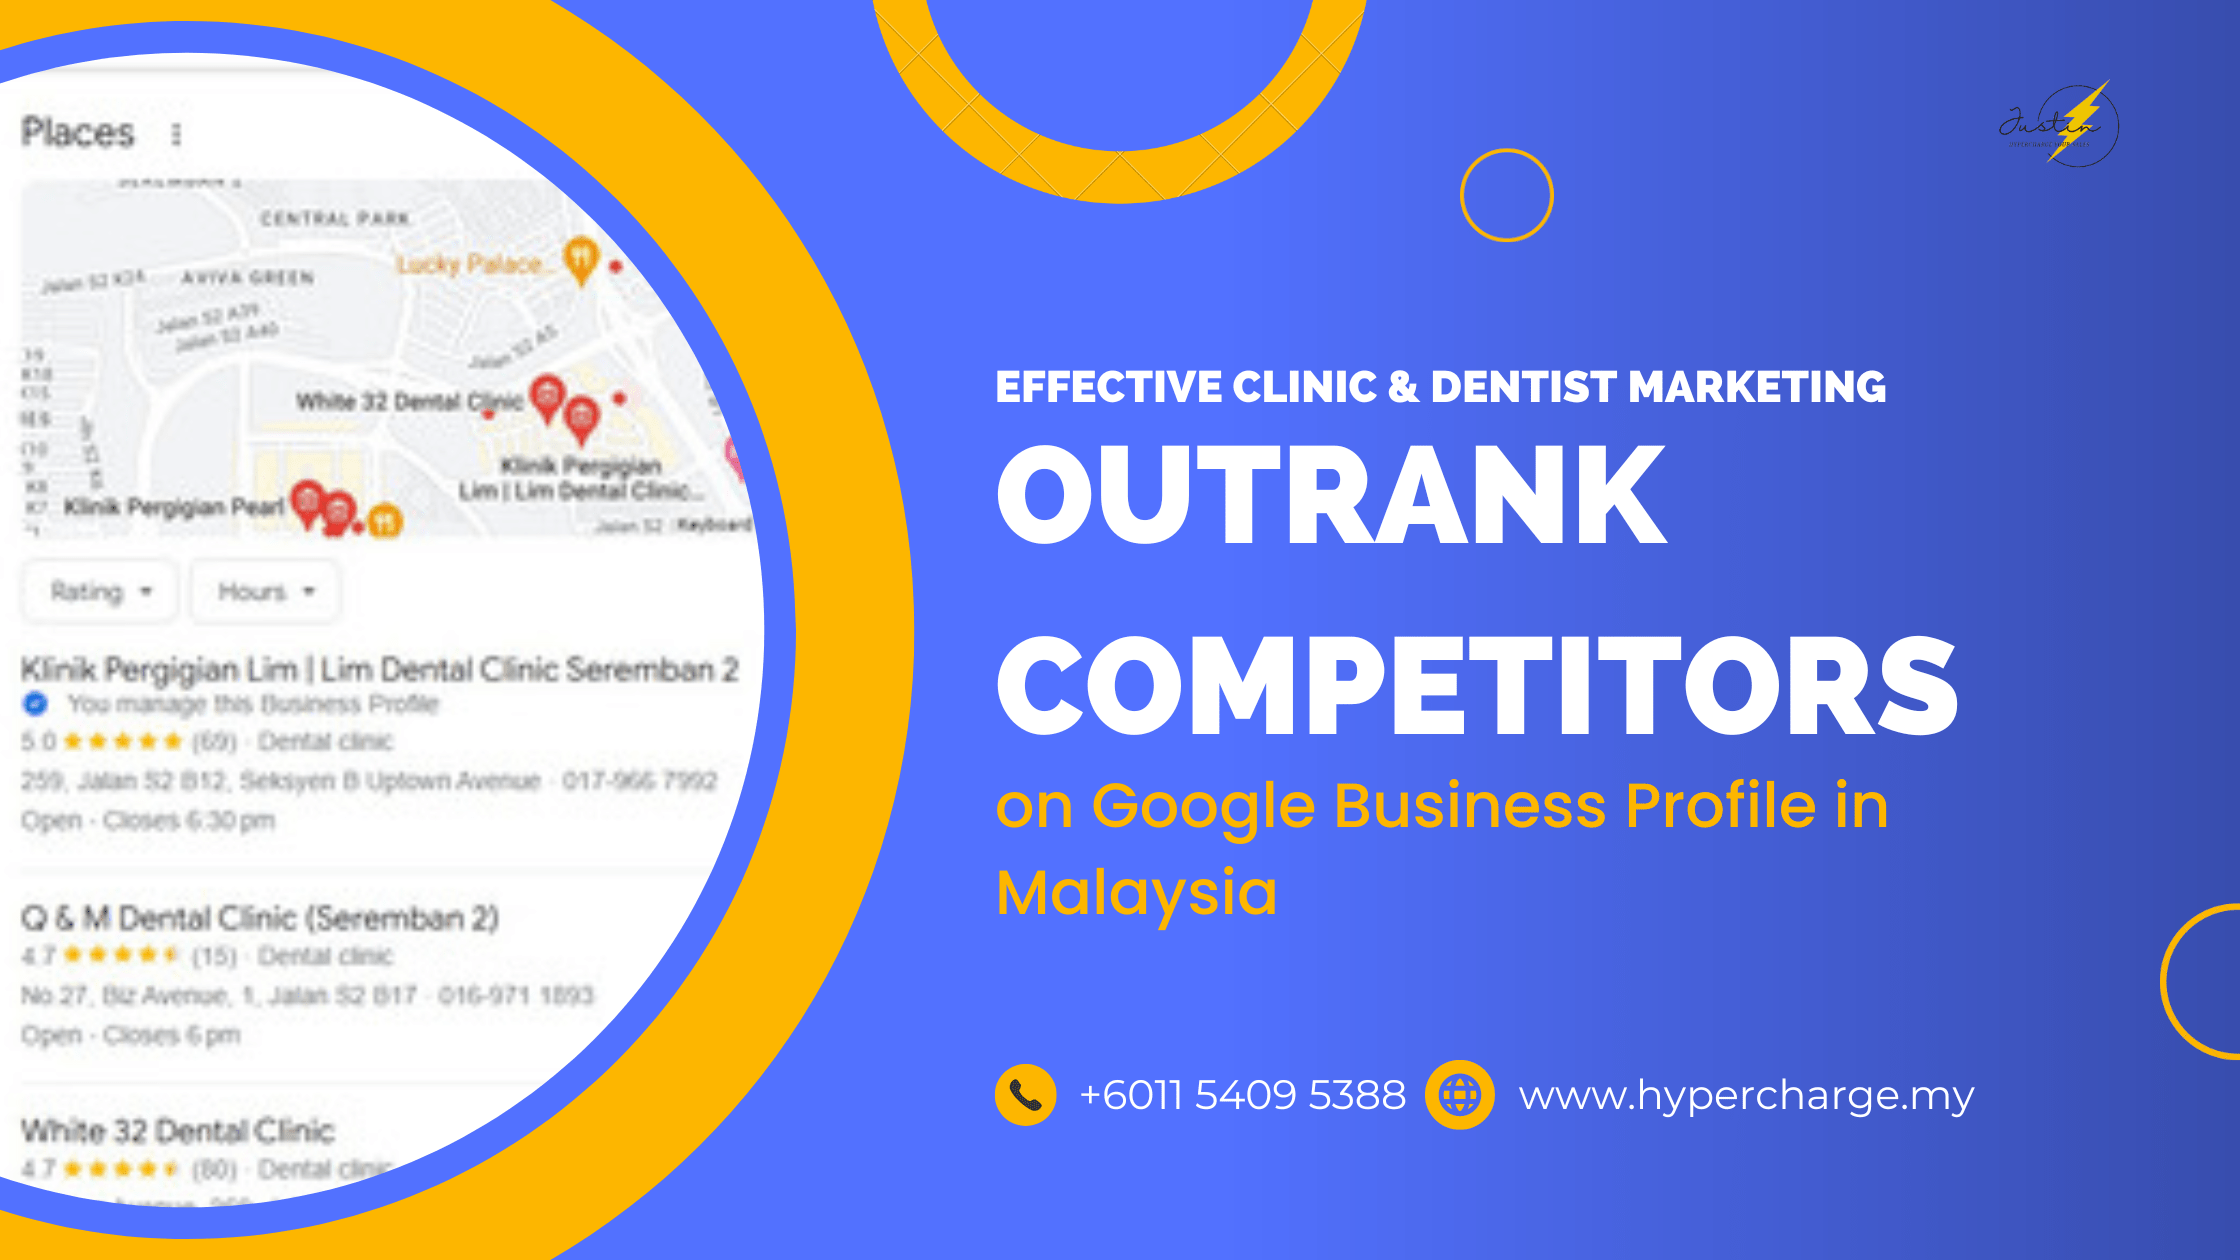 Effective Clinic & Dentist Marketing: Outrank Competitors on Google Business Profile in Malaysia